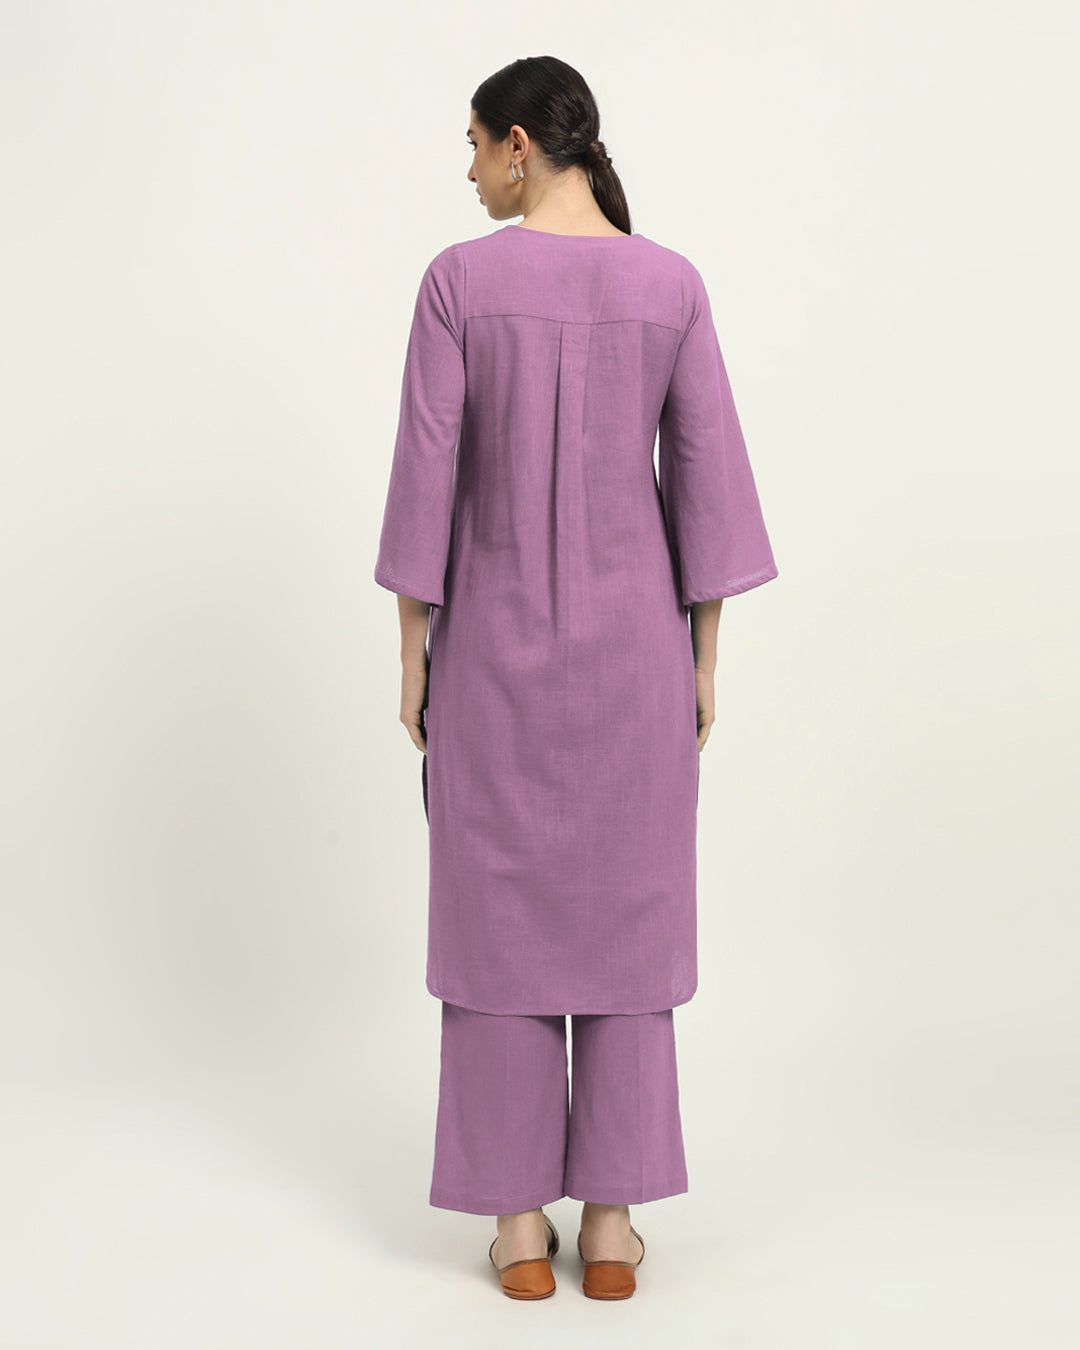 Iris Pink Rounded Reverie Solid Kurta (Without Bottoms)